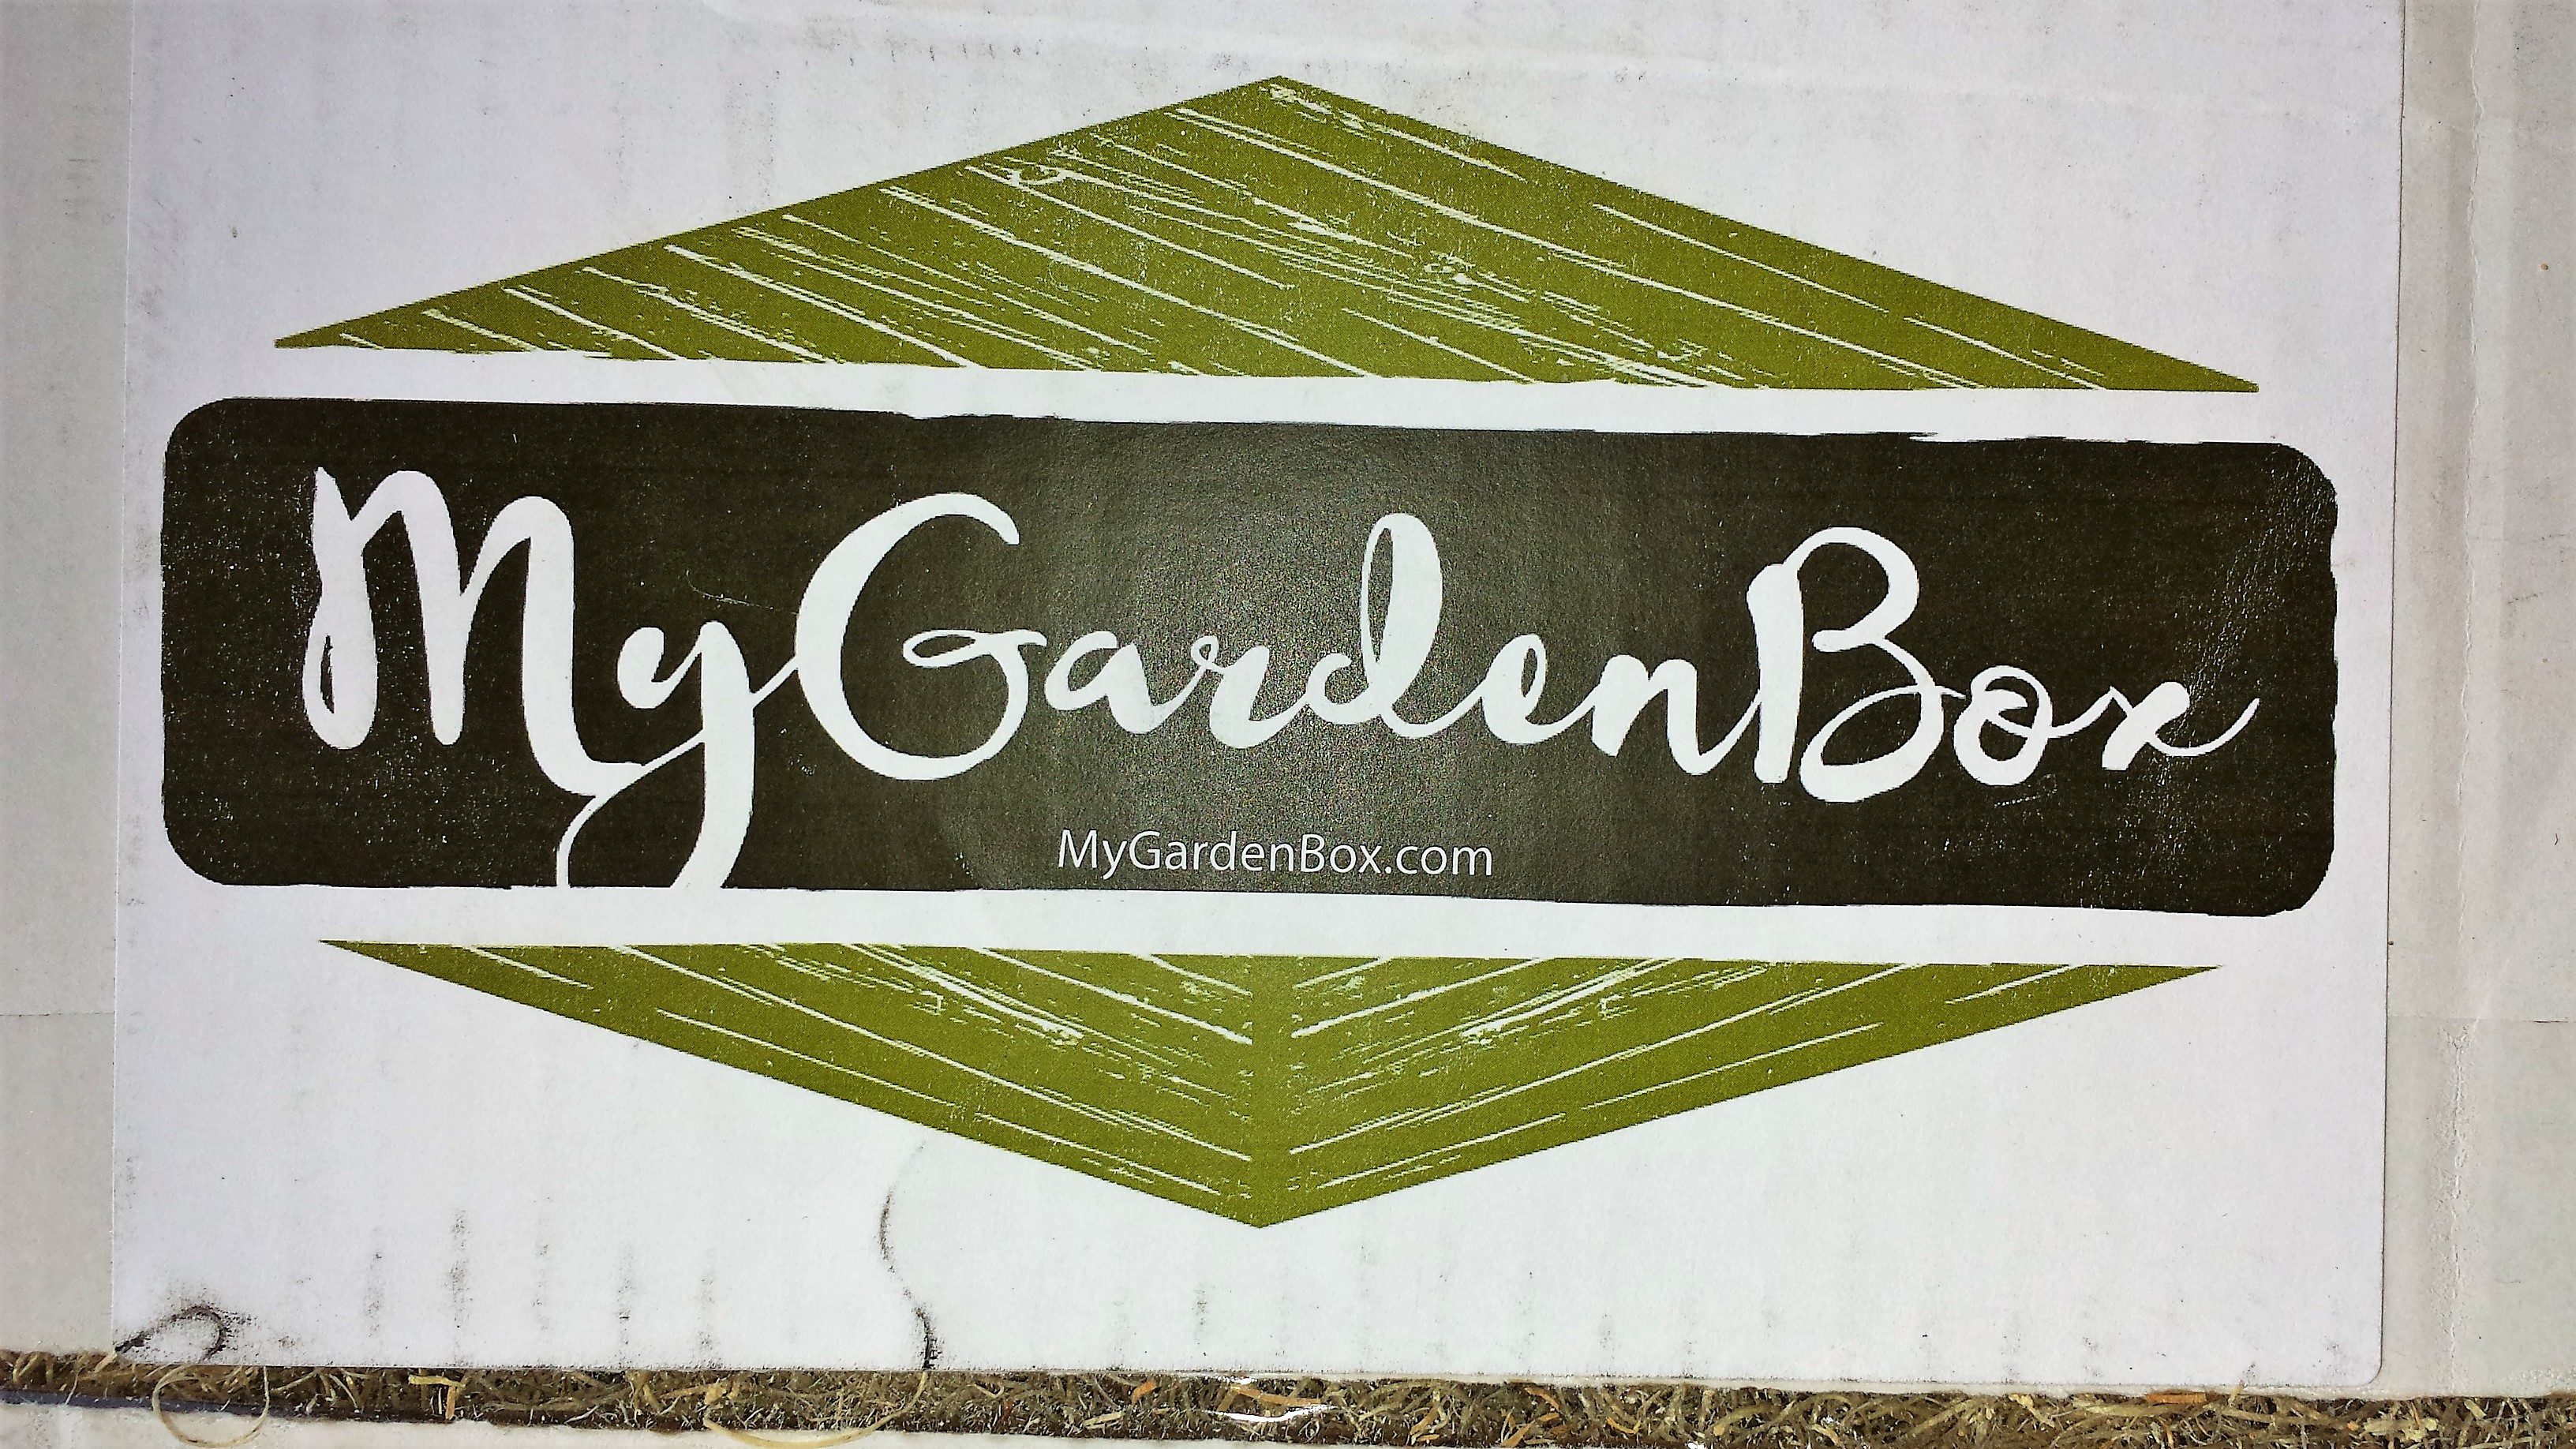 the instant box garden miracle reviews